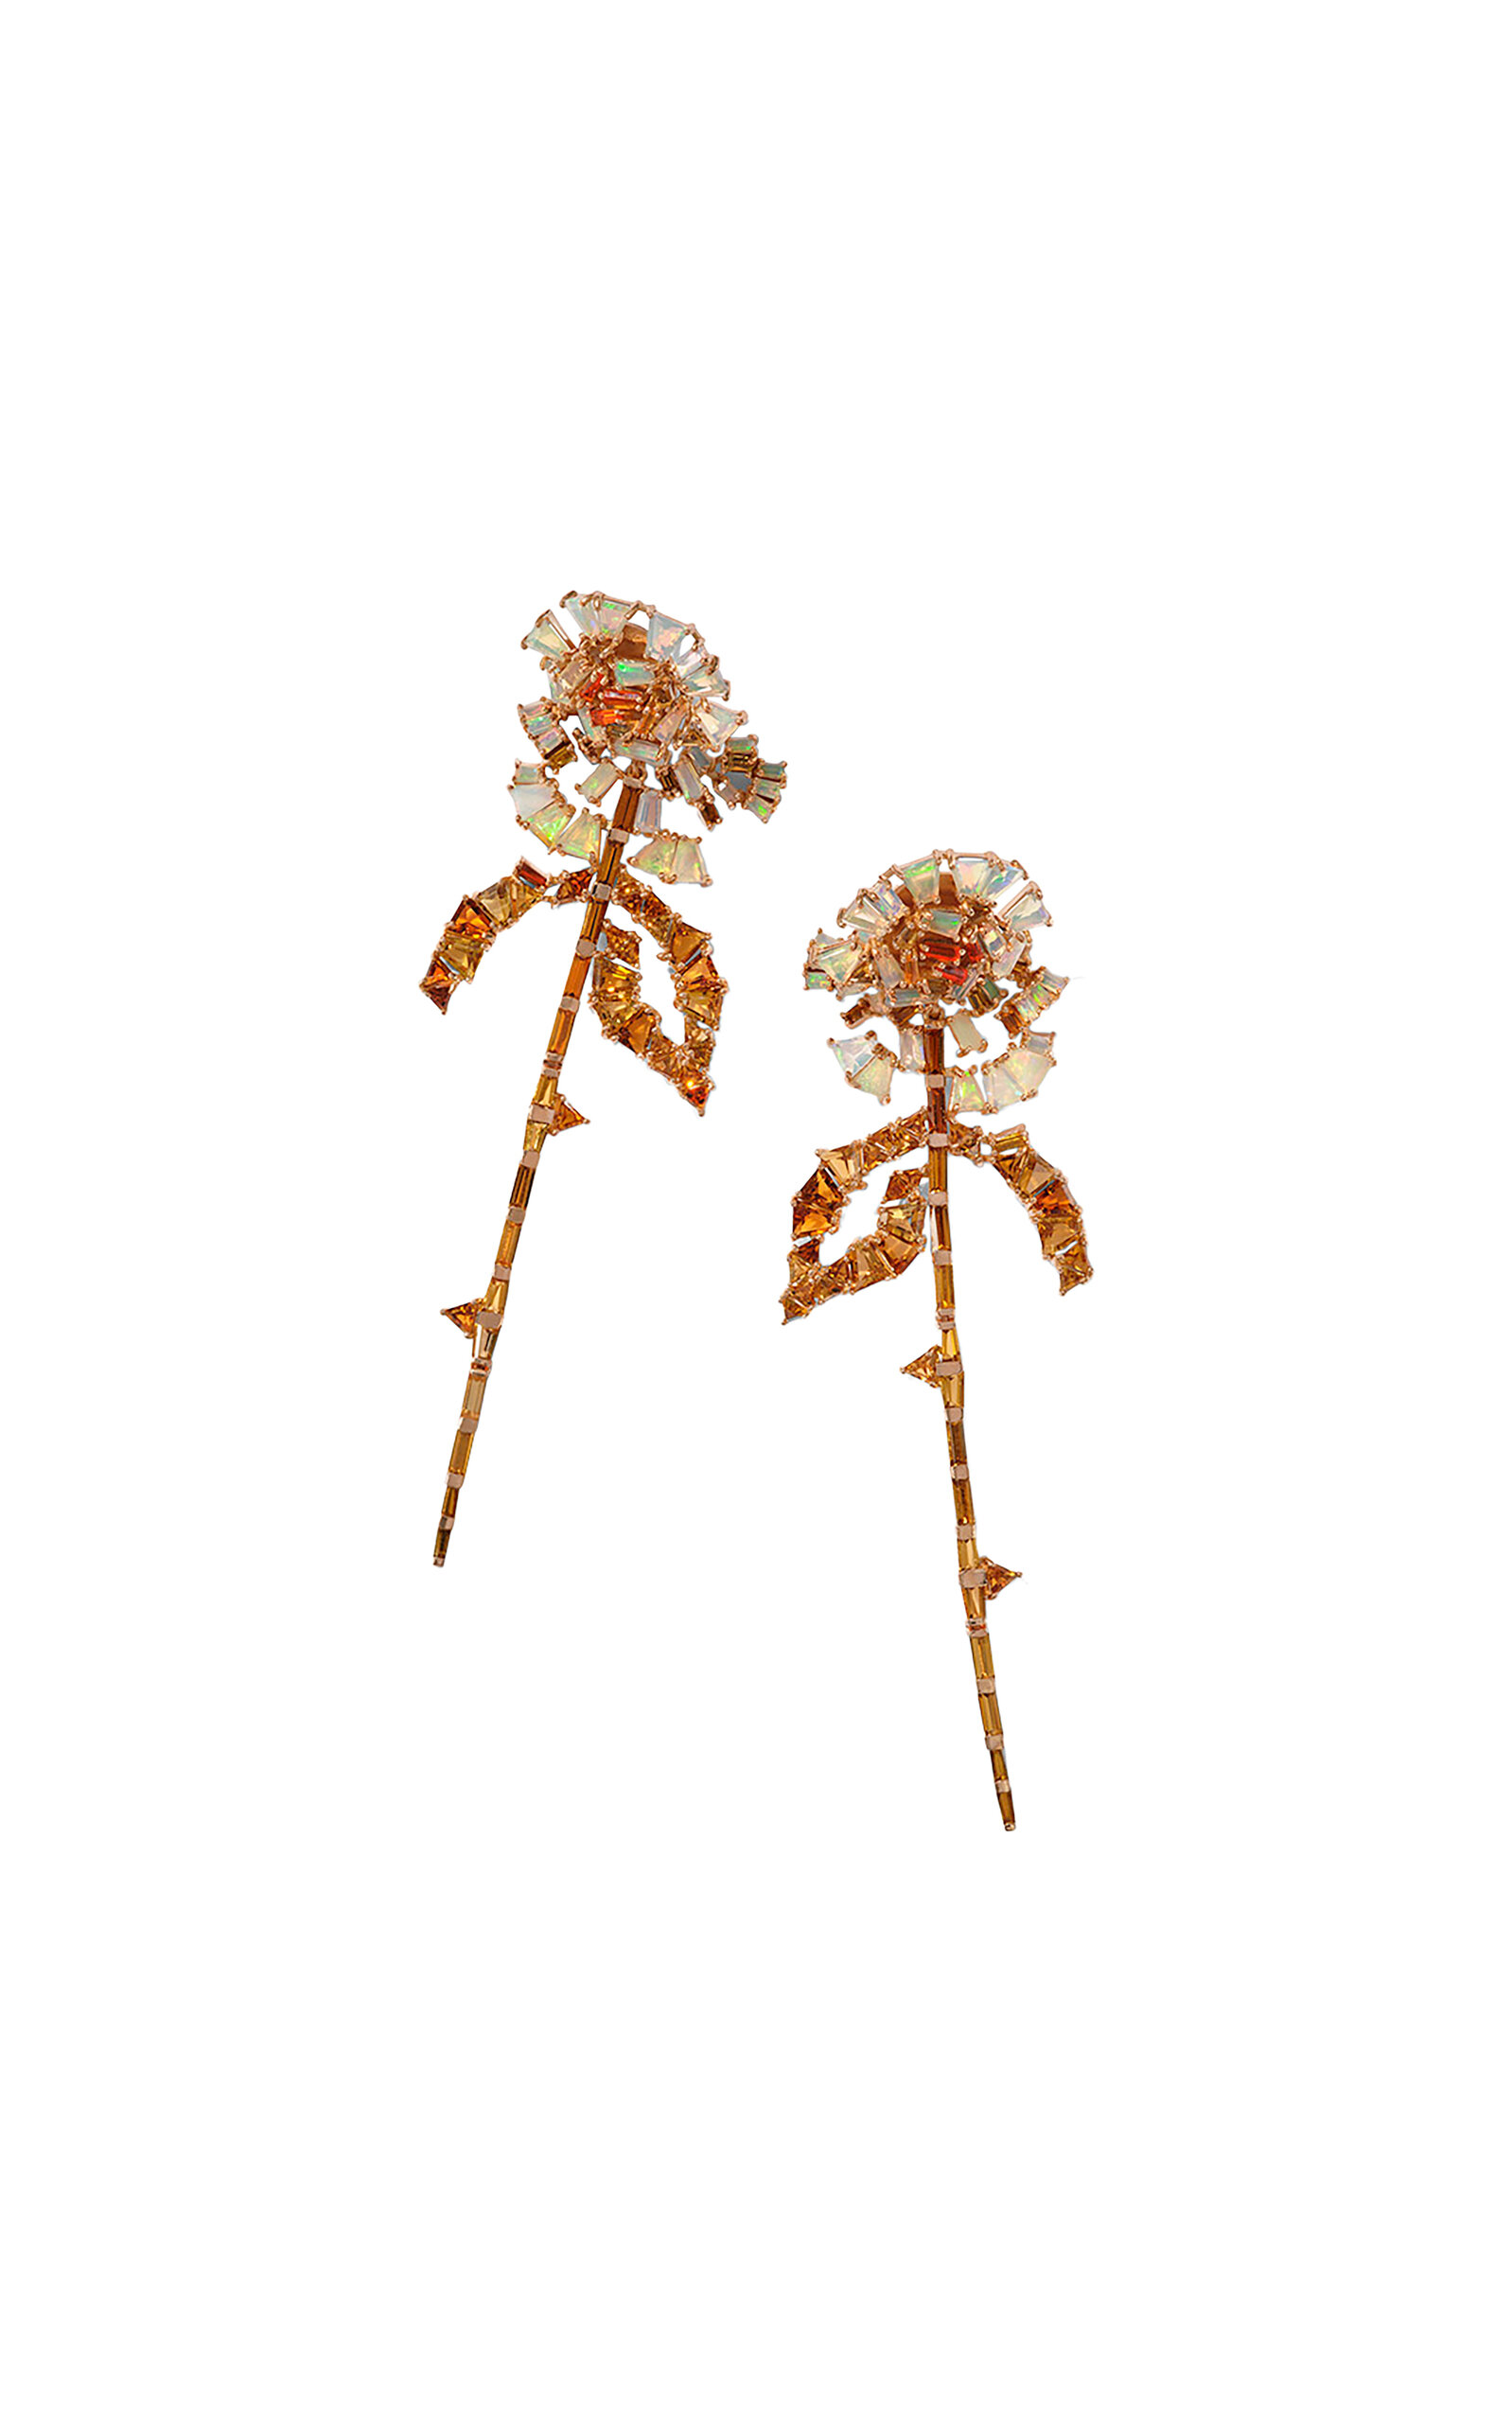 Nak Armstrong 20k Rose Gold Rose And Stem Earrings With Tourmaline And Opal